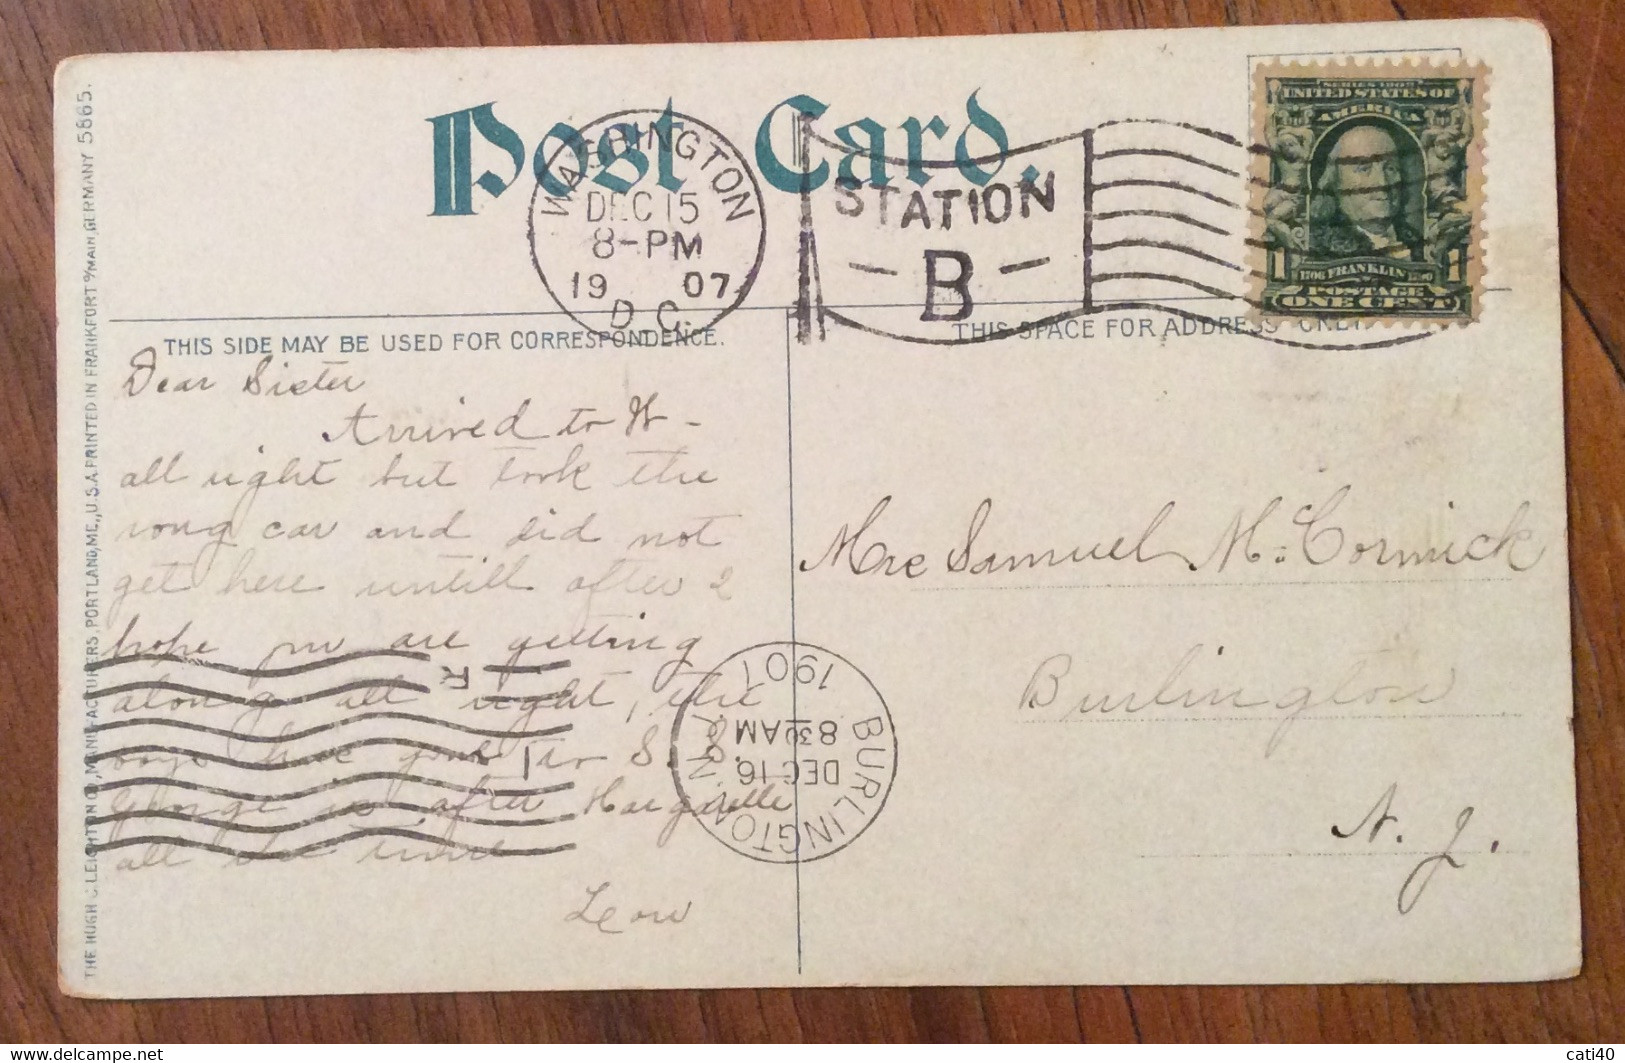 USA -  WASCHINGTON LIBRARY OF CONGRESS  - VINTAGE POST CARD   1907 - Fall River